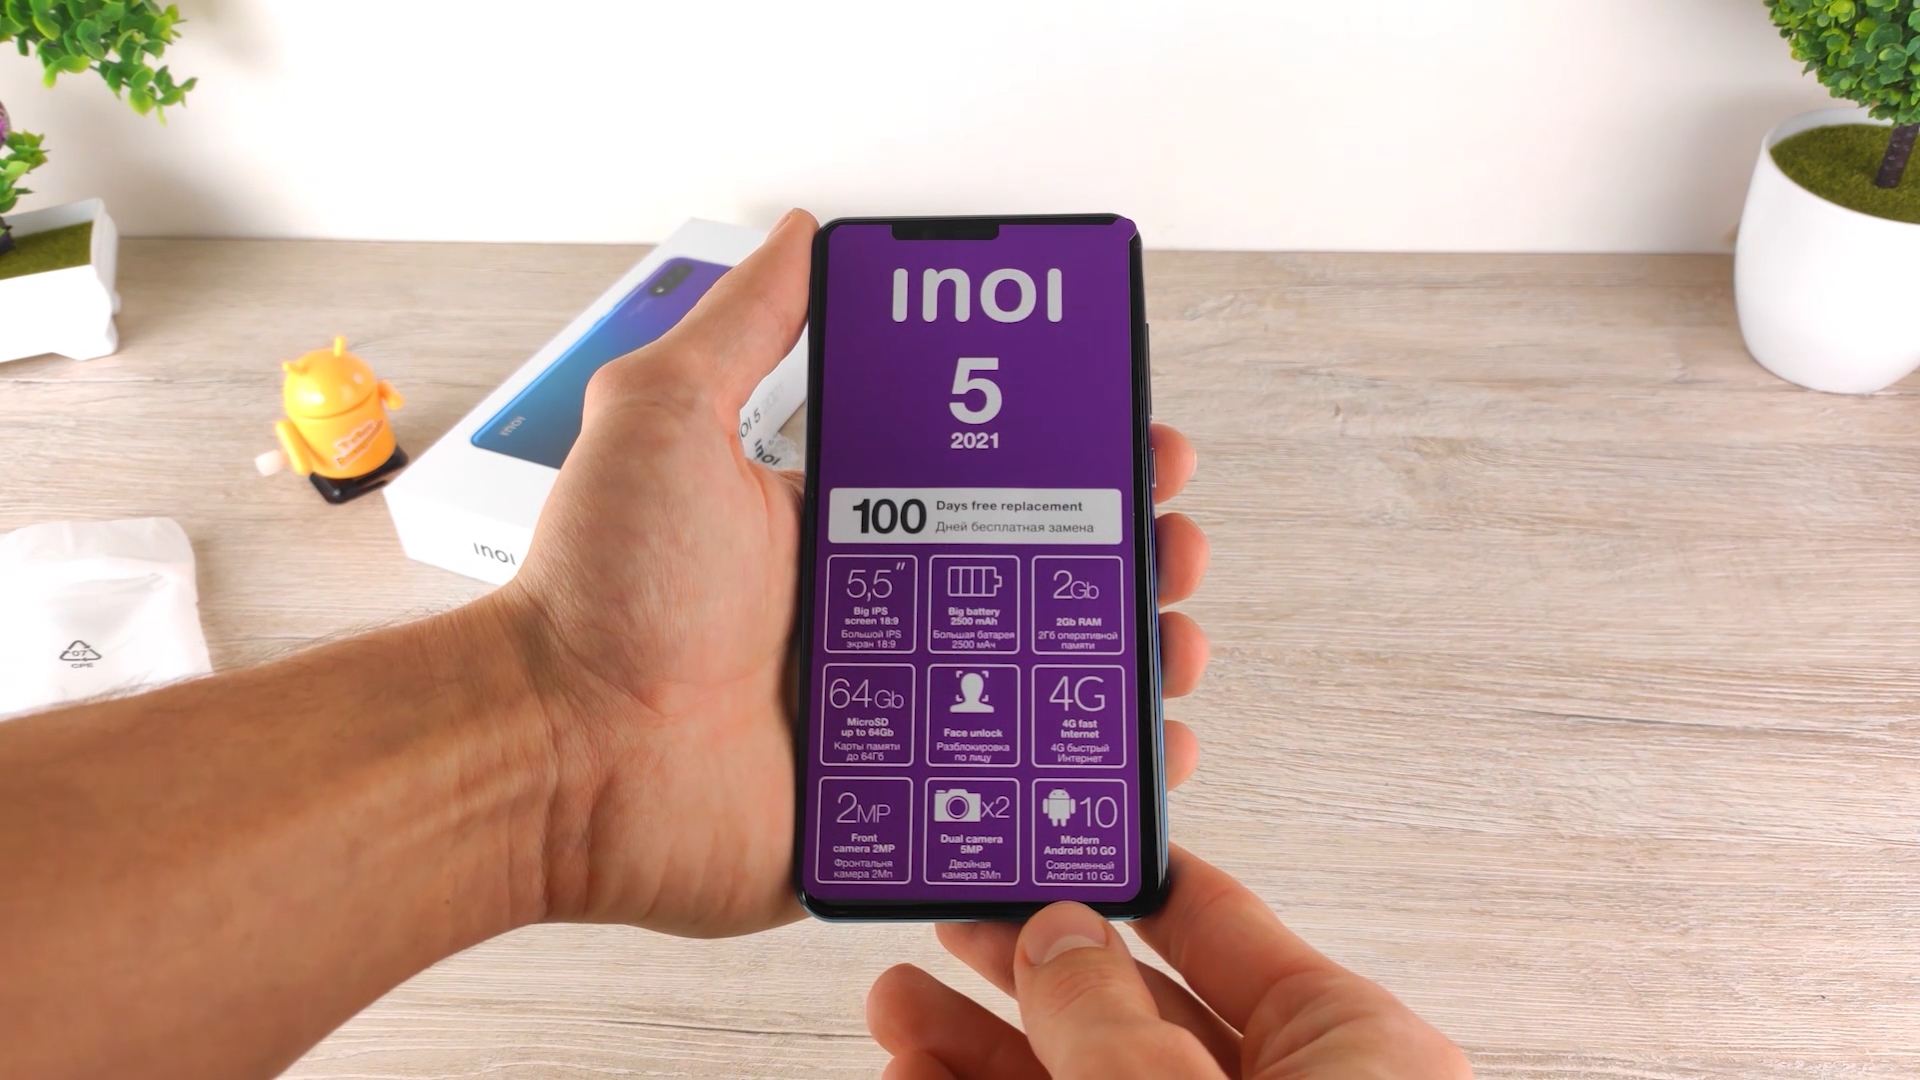 INOI 5 2021 is a compact smartphone in hand